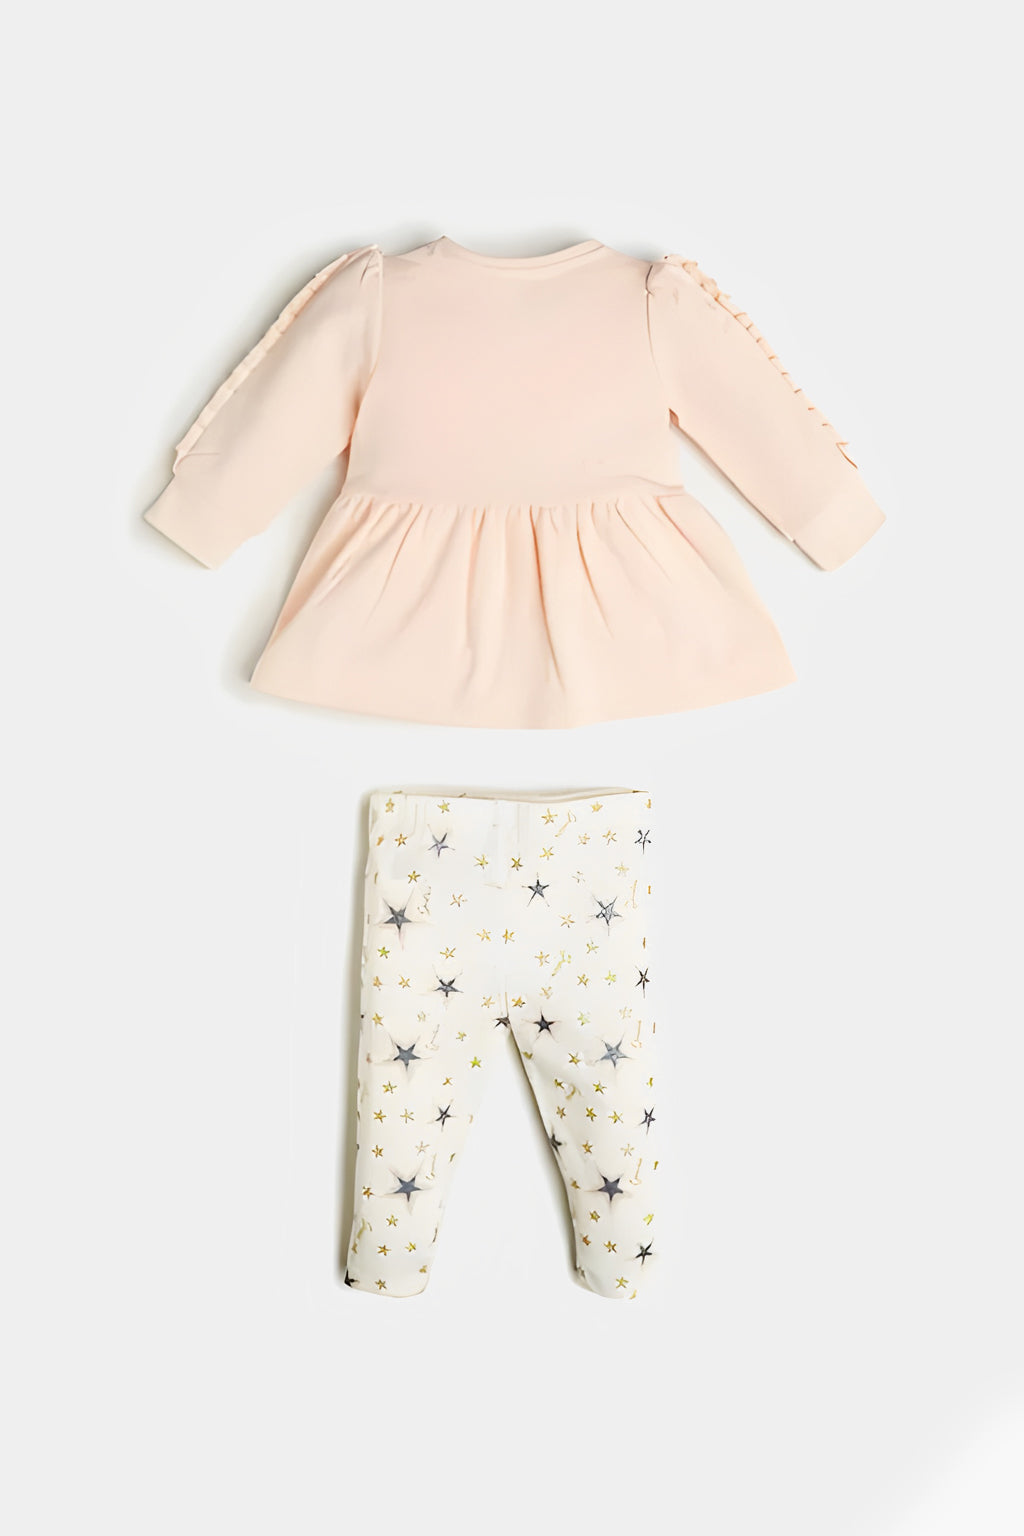 Guess - Skirts and Pants for Infants